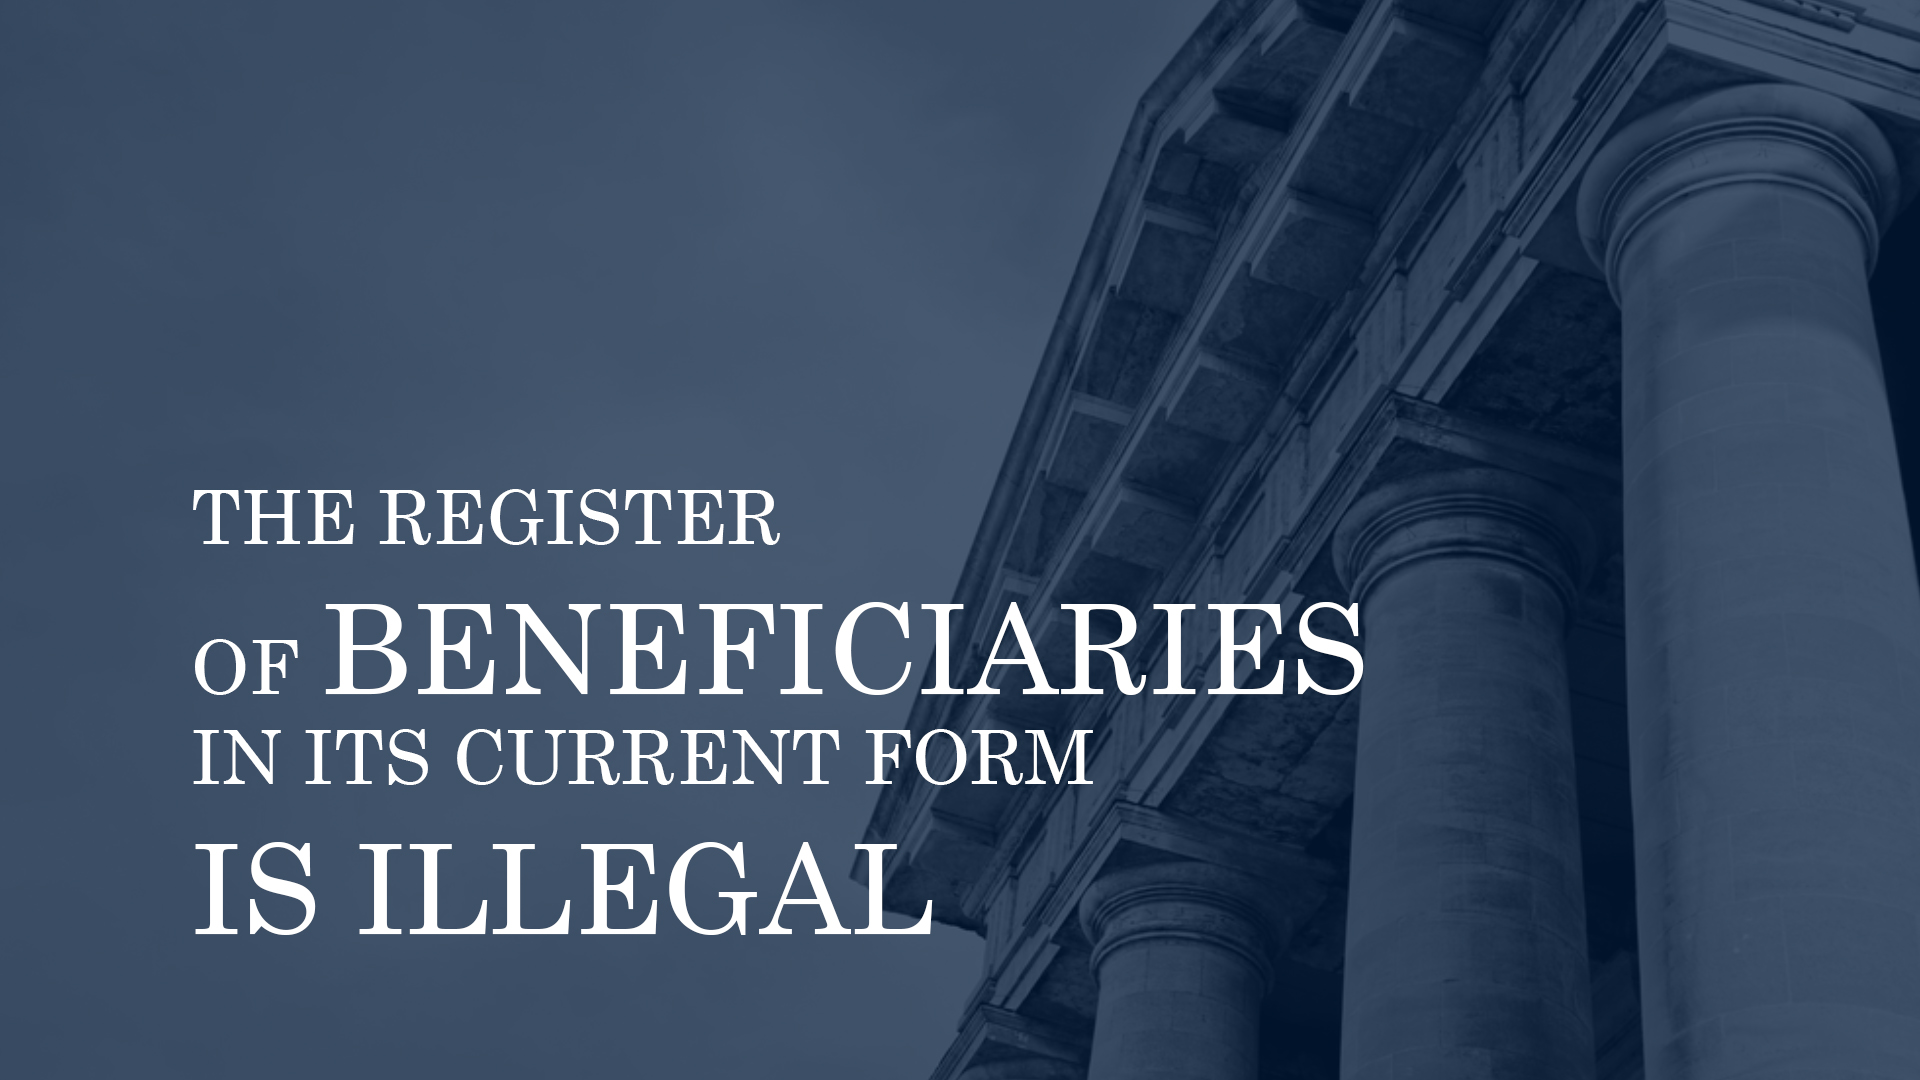 THE REGISTER OF BENEFICIARIES IN ITS CURRENT FORM IS ILLEGAL